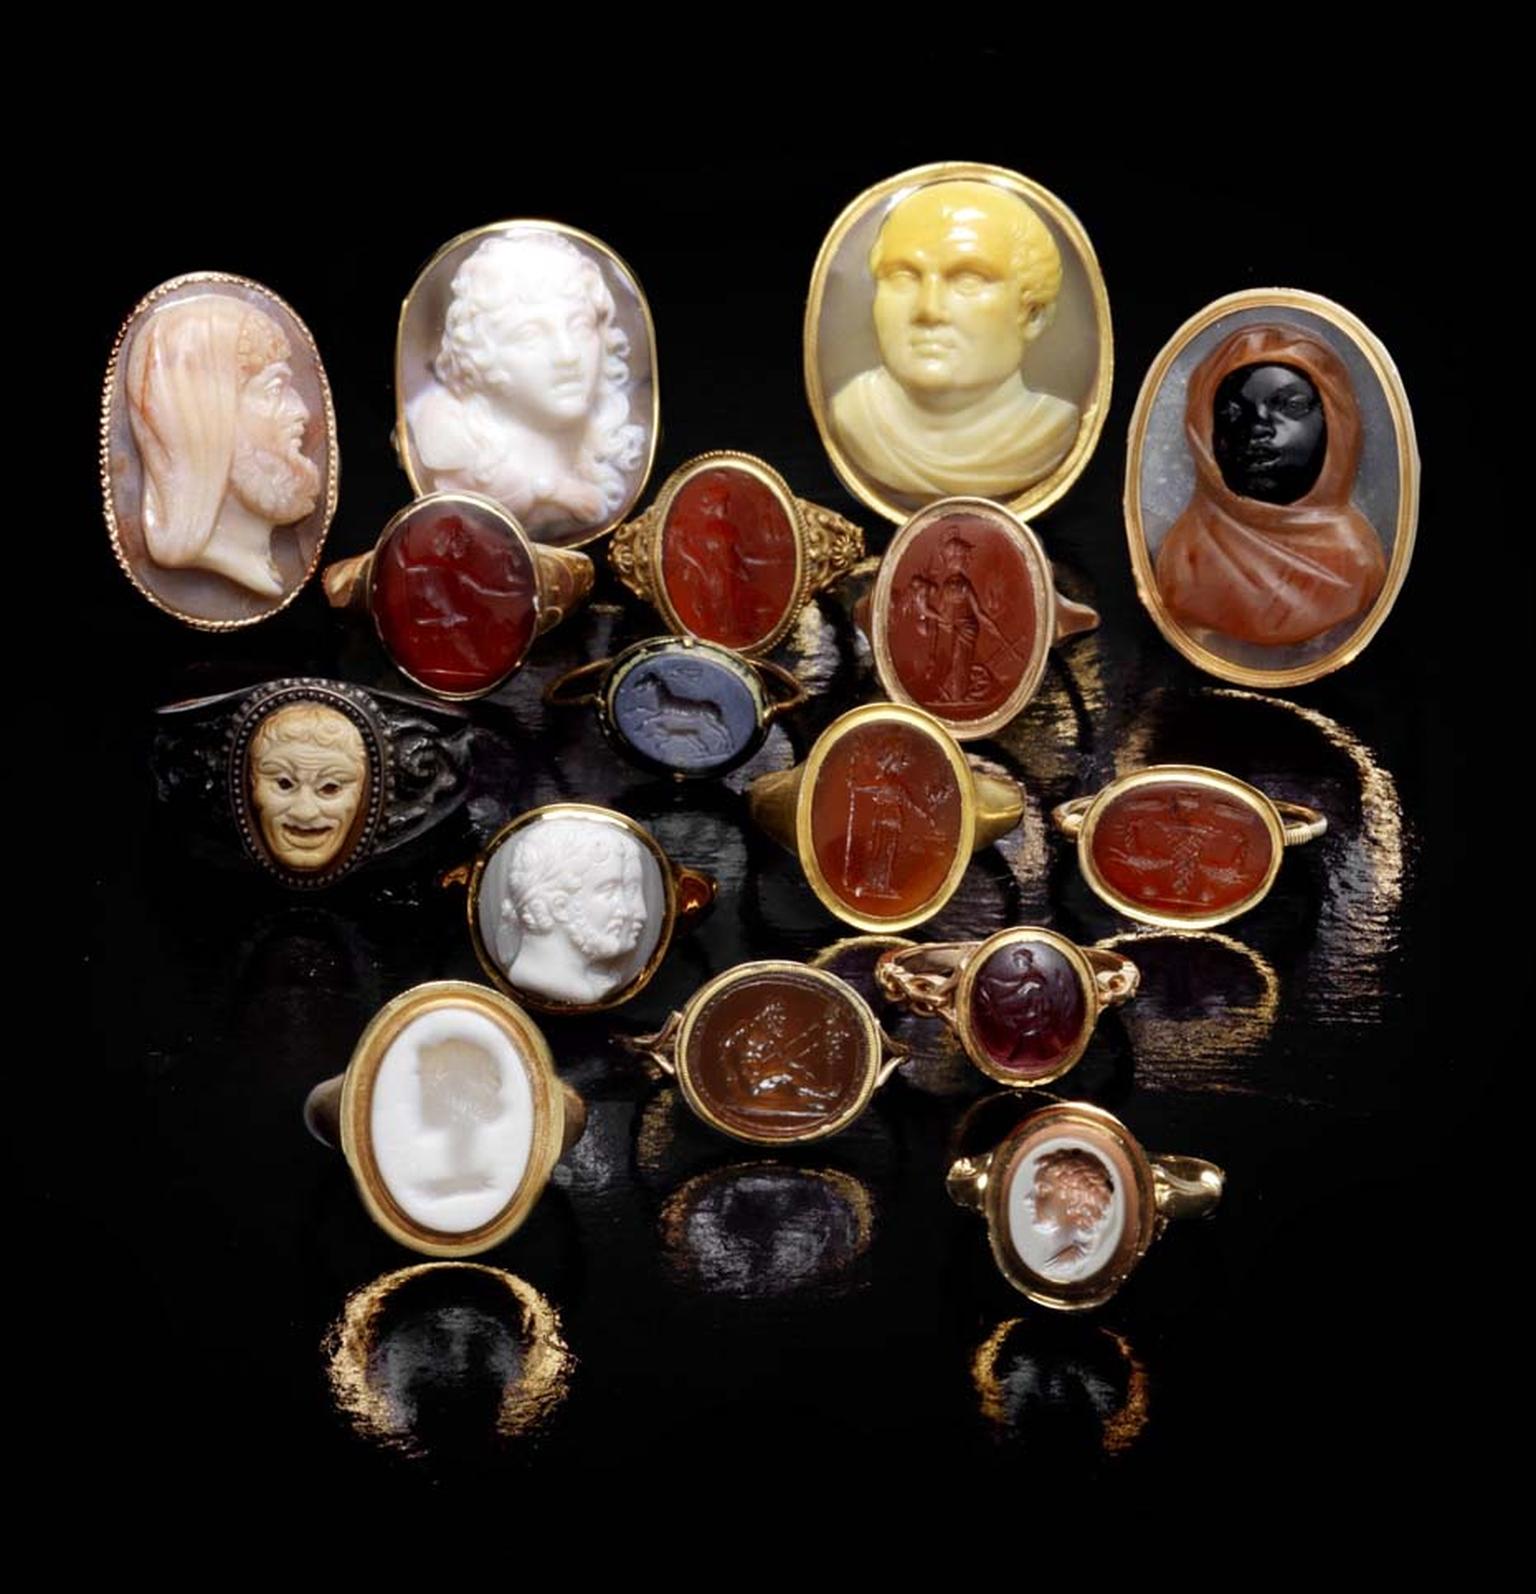 Emily Barber, Director of Bonhams Jewellery Department, comments: "Since ancient times, cameos and intaglios have been regarded as the discerning person's status symbol; with the sale of The Ceres Collection of 101 exquisite rings, Bonhams hopes to attrac